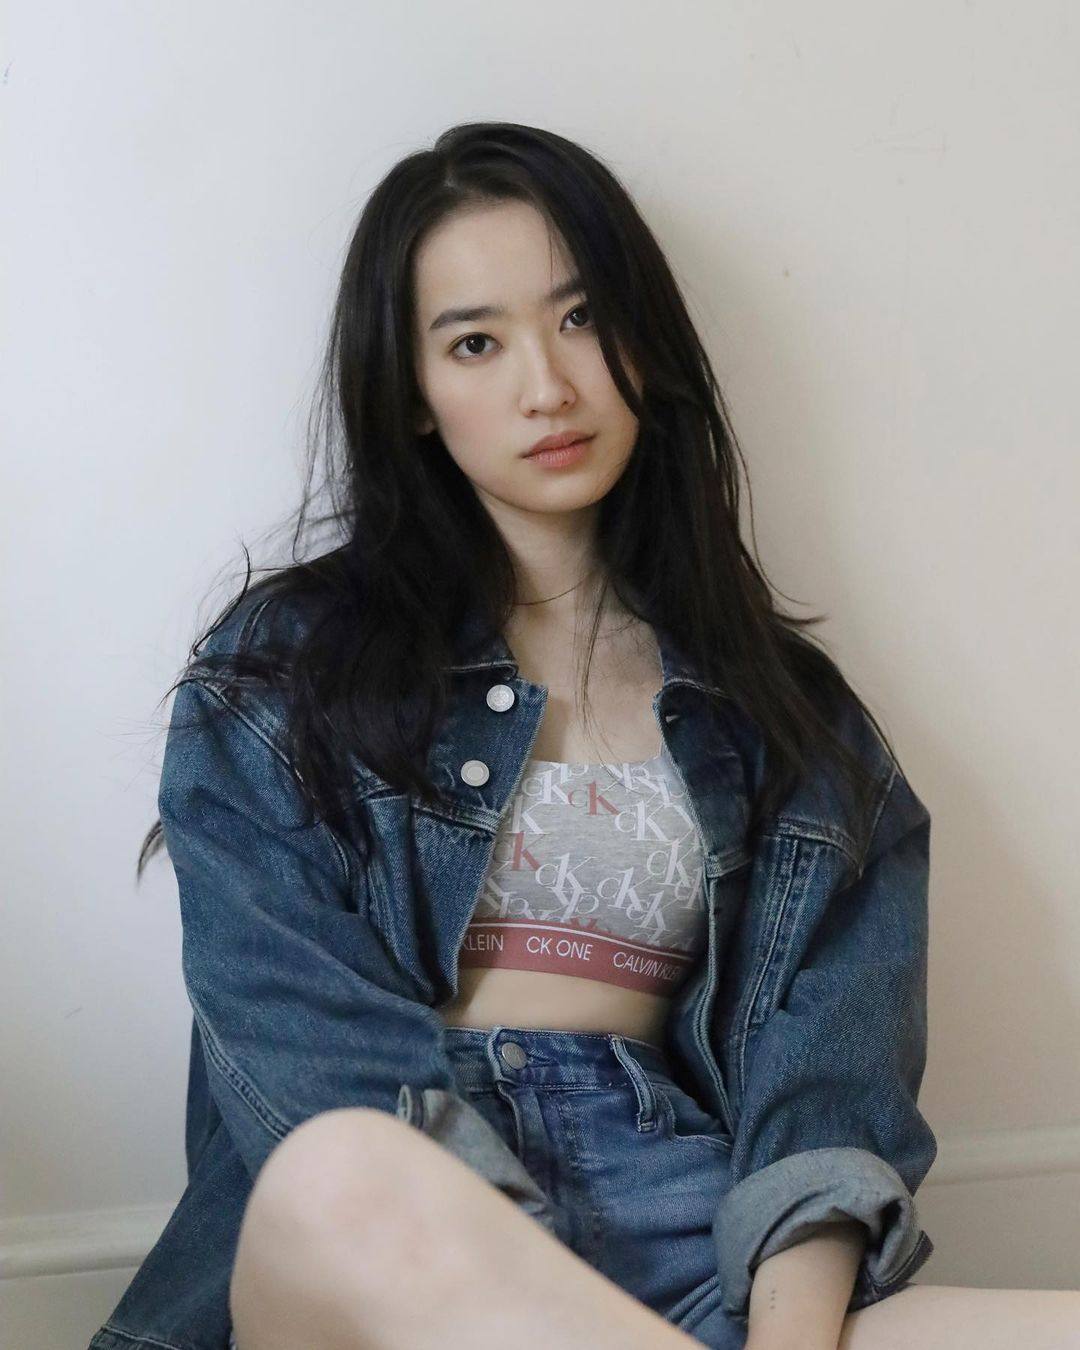 Ashley Lin, daughter of ex-celebrity couple Mimi Kung and Wei Lin, is slowly but surely making a name for herself. Photo: @kaening/Instagram